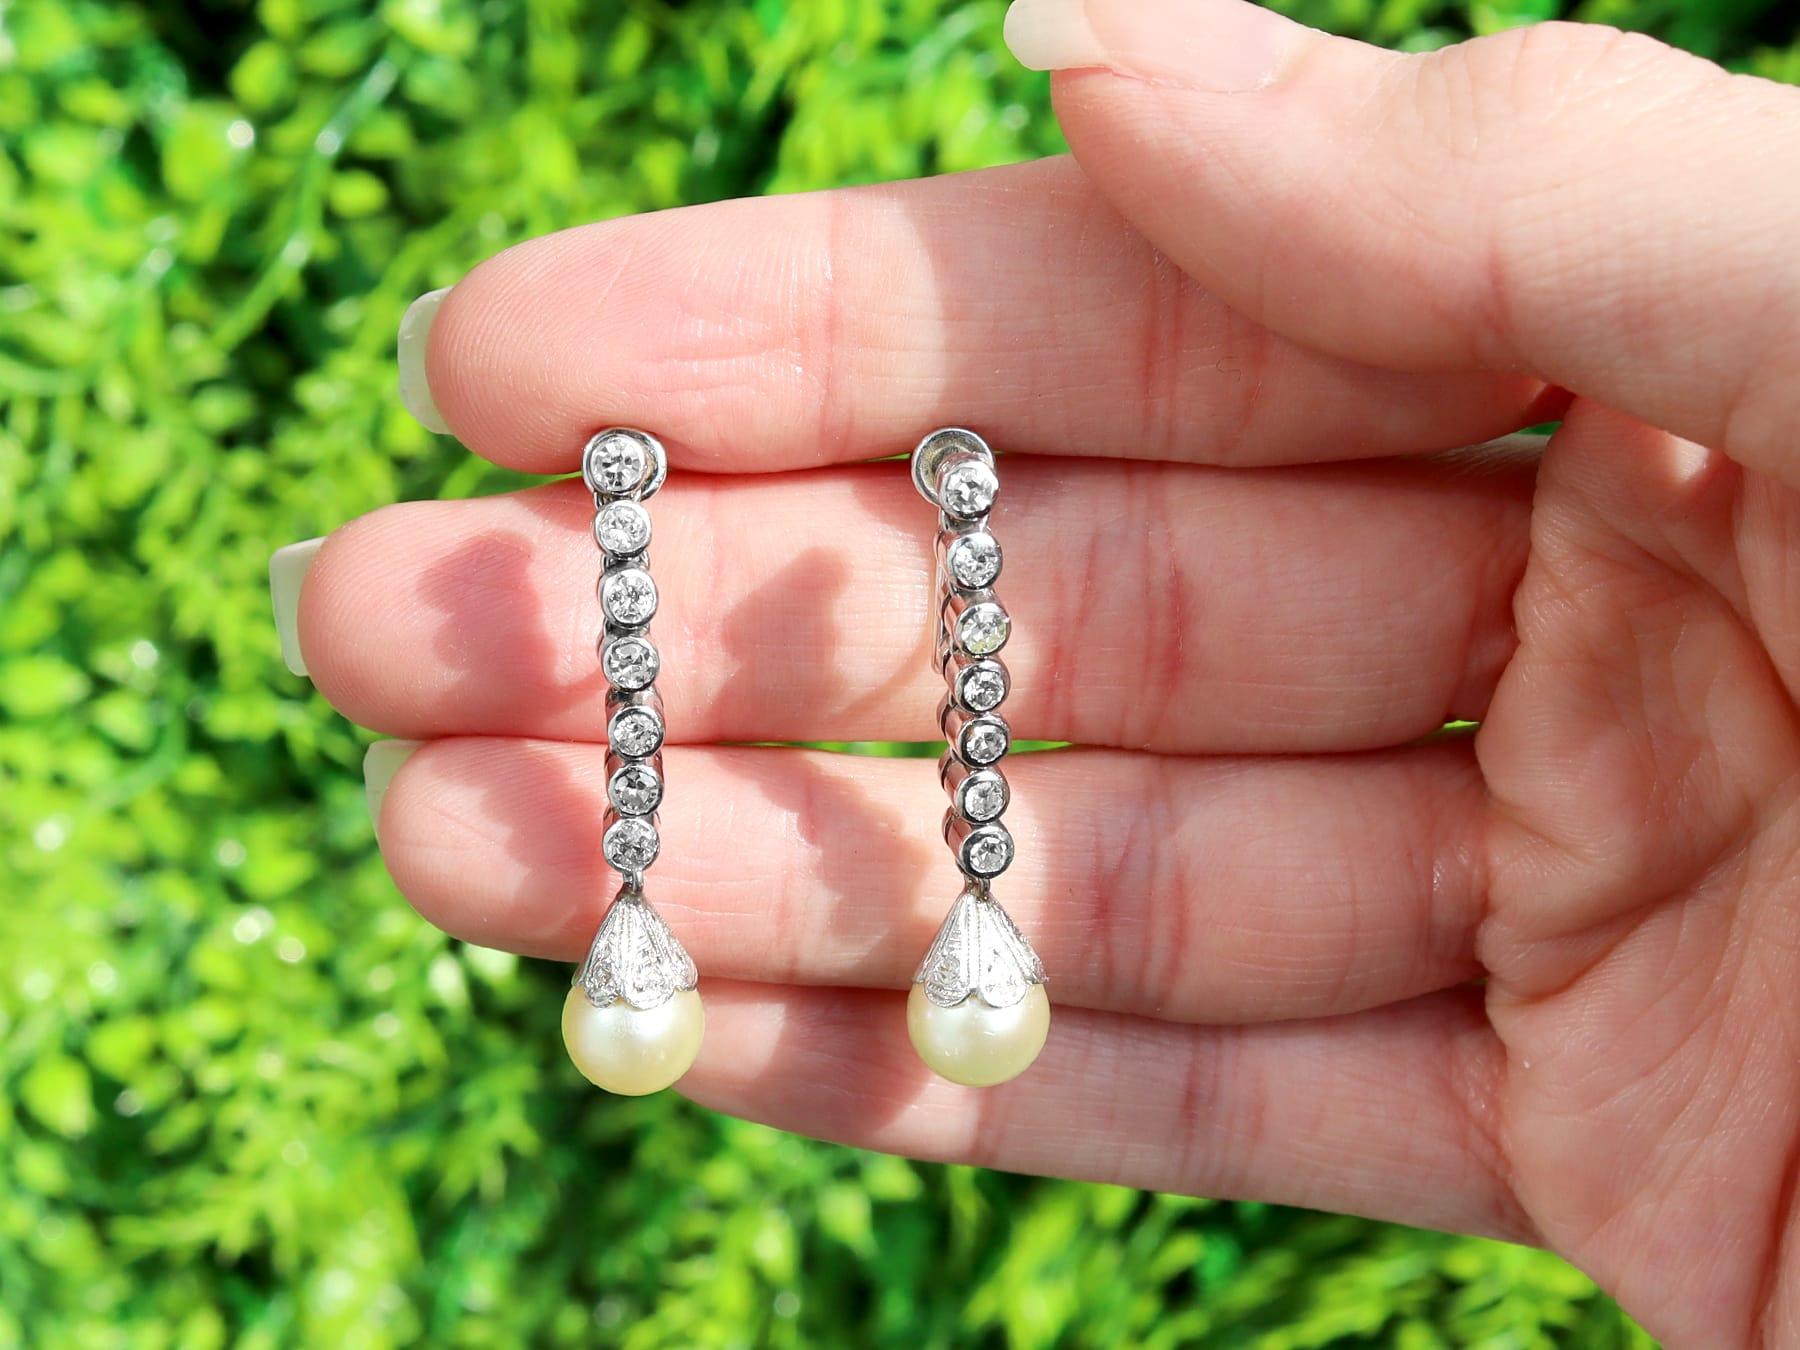 An impressive pair of 0.70 carat diamond and cultured pearl, platinum and 18 karat white gold drop earrings; part of our diverse pearl estate jewelry collections.

These fine and impressive pearl drop earrings have been crafted in platinum with 18k